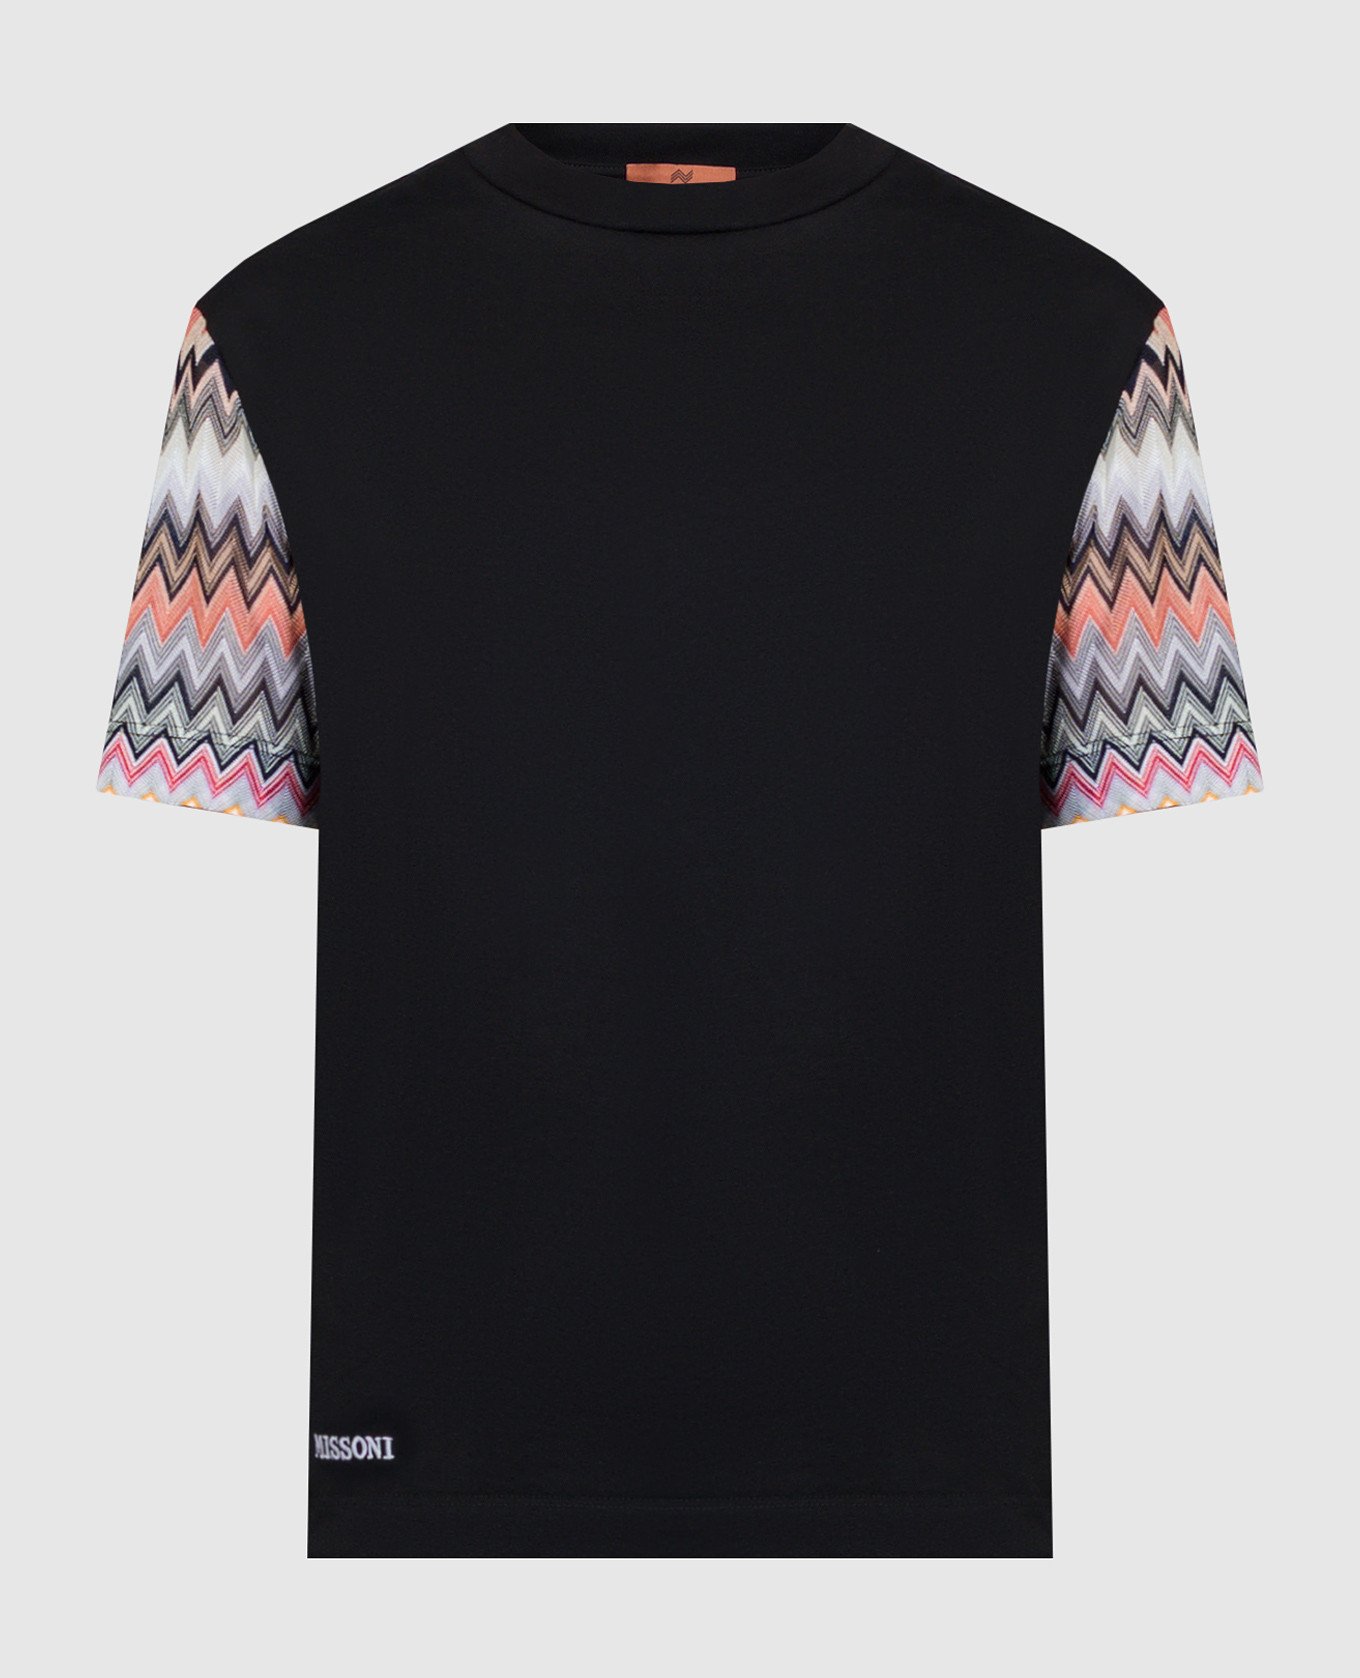 Black t-shirt with a geometric pattern and logo embroidery